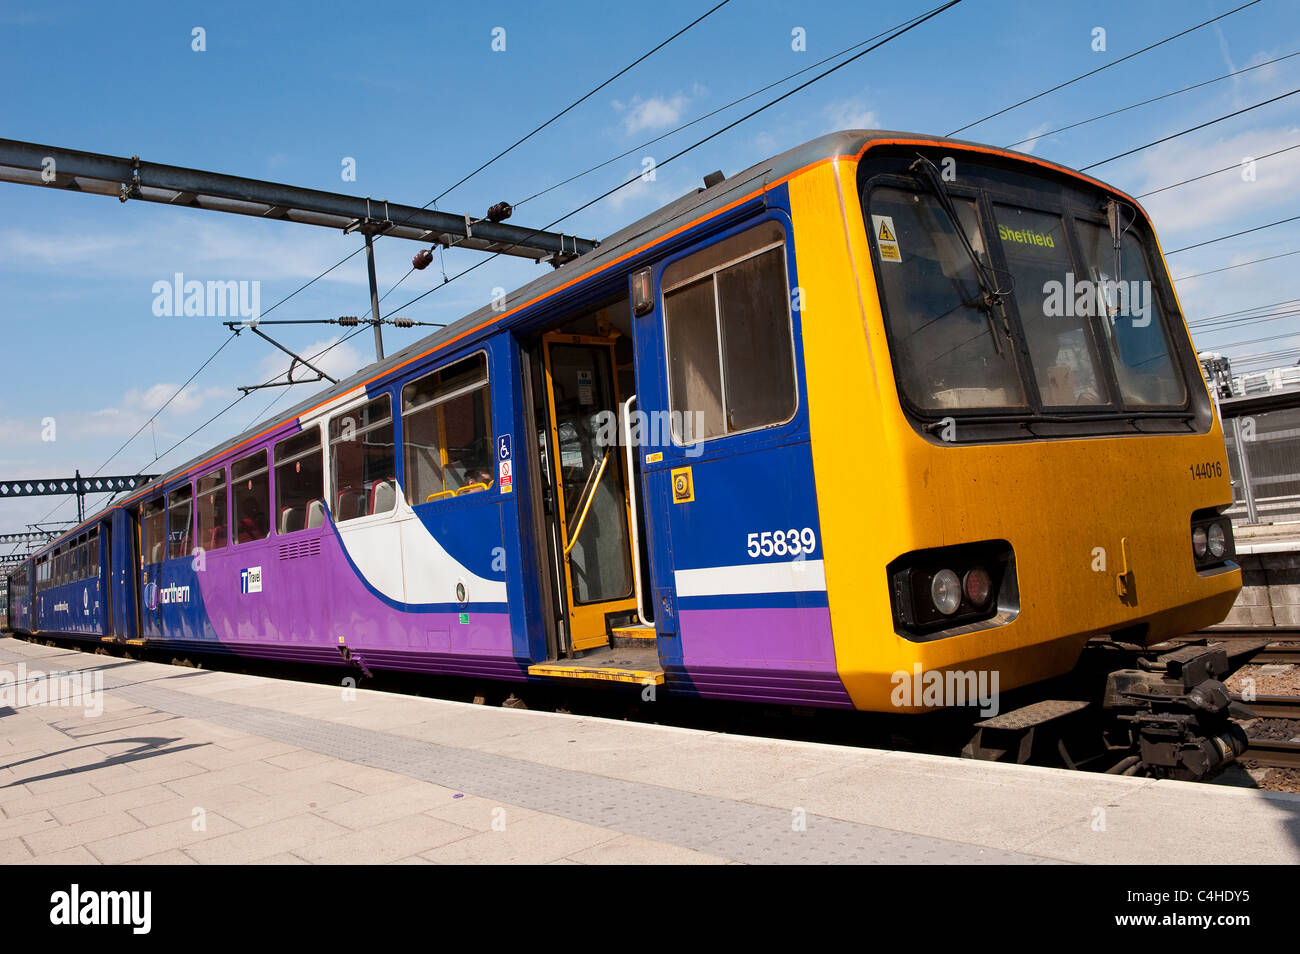 Class 144 pacer train in Northern Rail livery at a railway station in England. Stock Photo